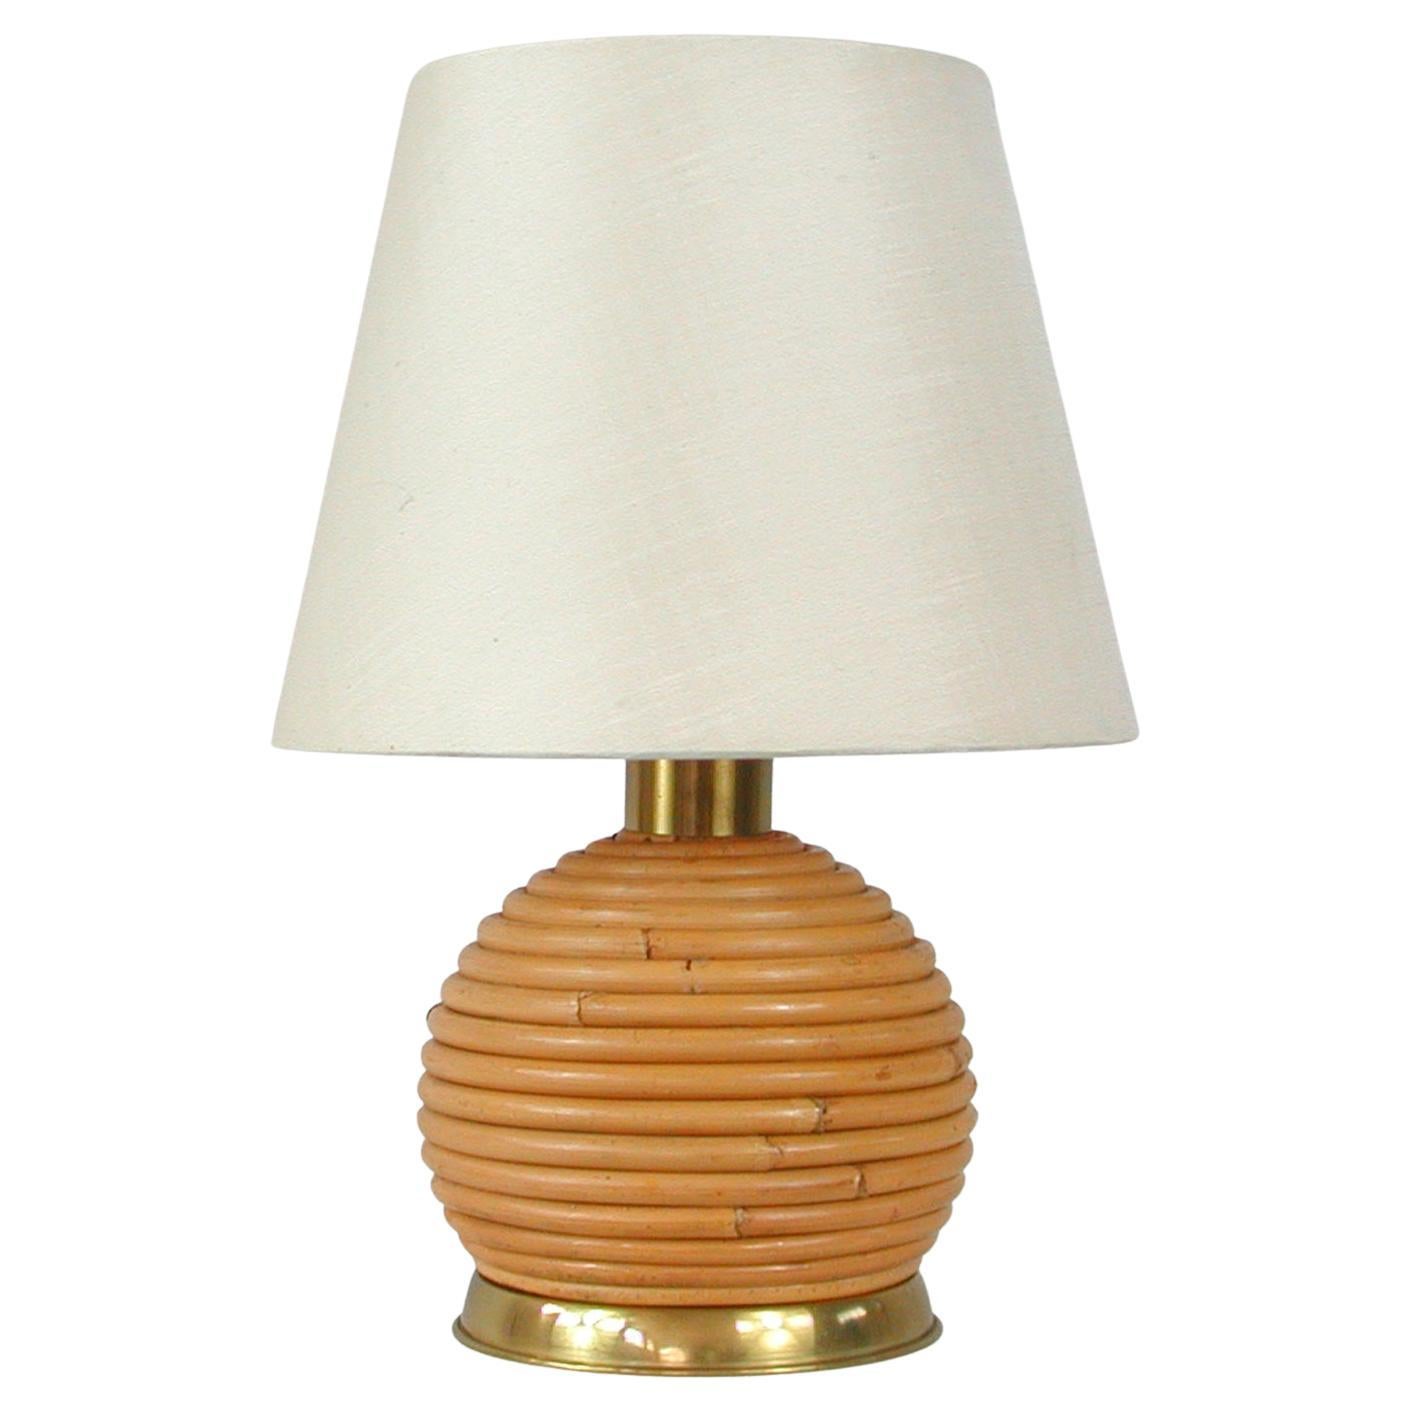 Midcentury Bamboo and Brass Globe Table Lamp, Vivai del Sud attr. Italy 1960s For Sale